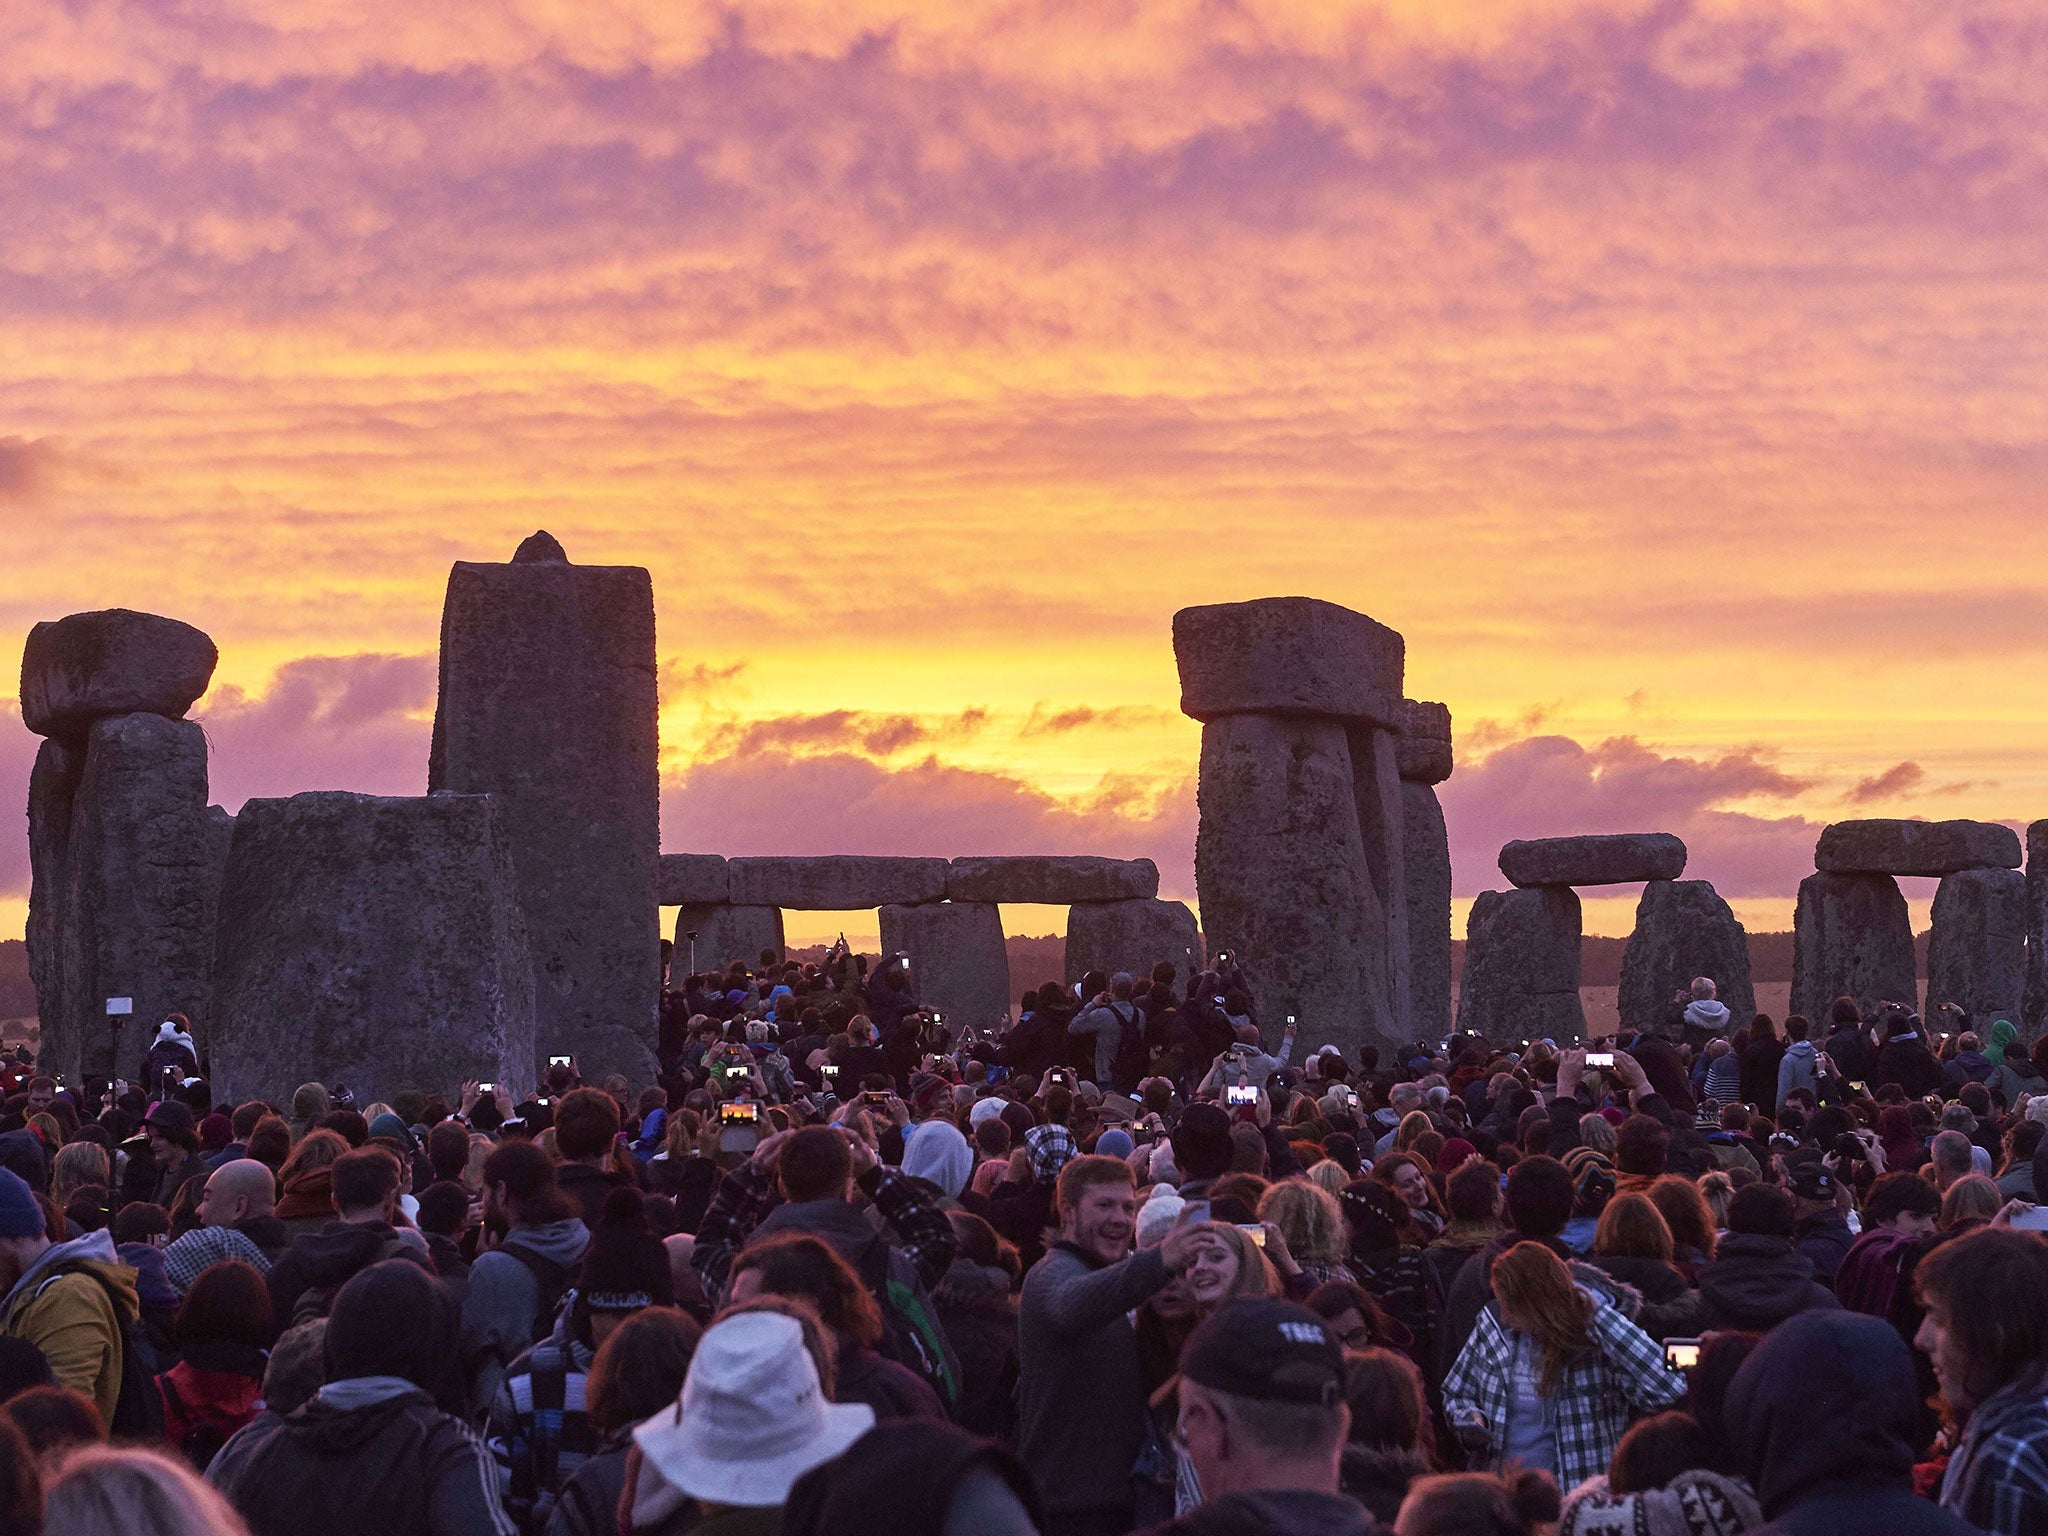 Revellers watch the sunrise as they celebrate the pagan festival of Summer Solstice at Stonehenge in Wiltshire. The festival, which dates back thousands of years, celebrates the longest day of the year when the sun is at its maximum elevation. Modern drui